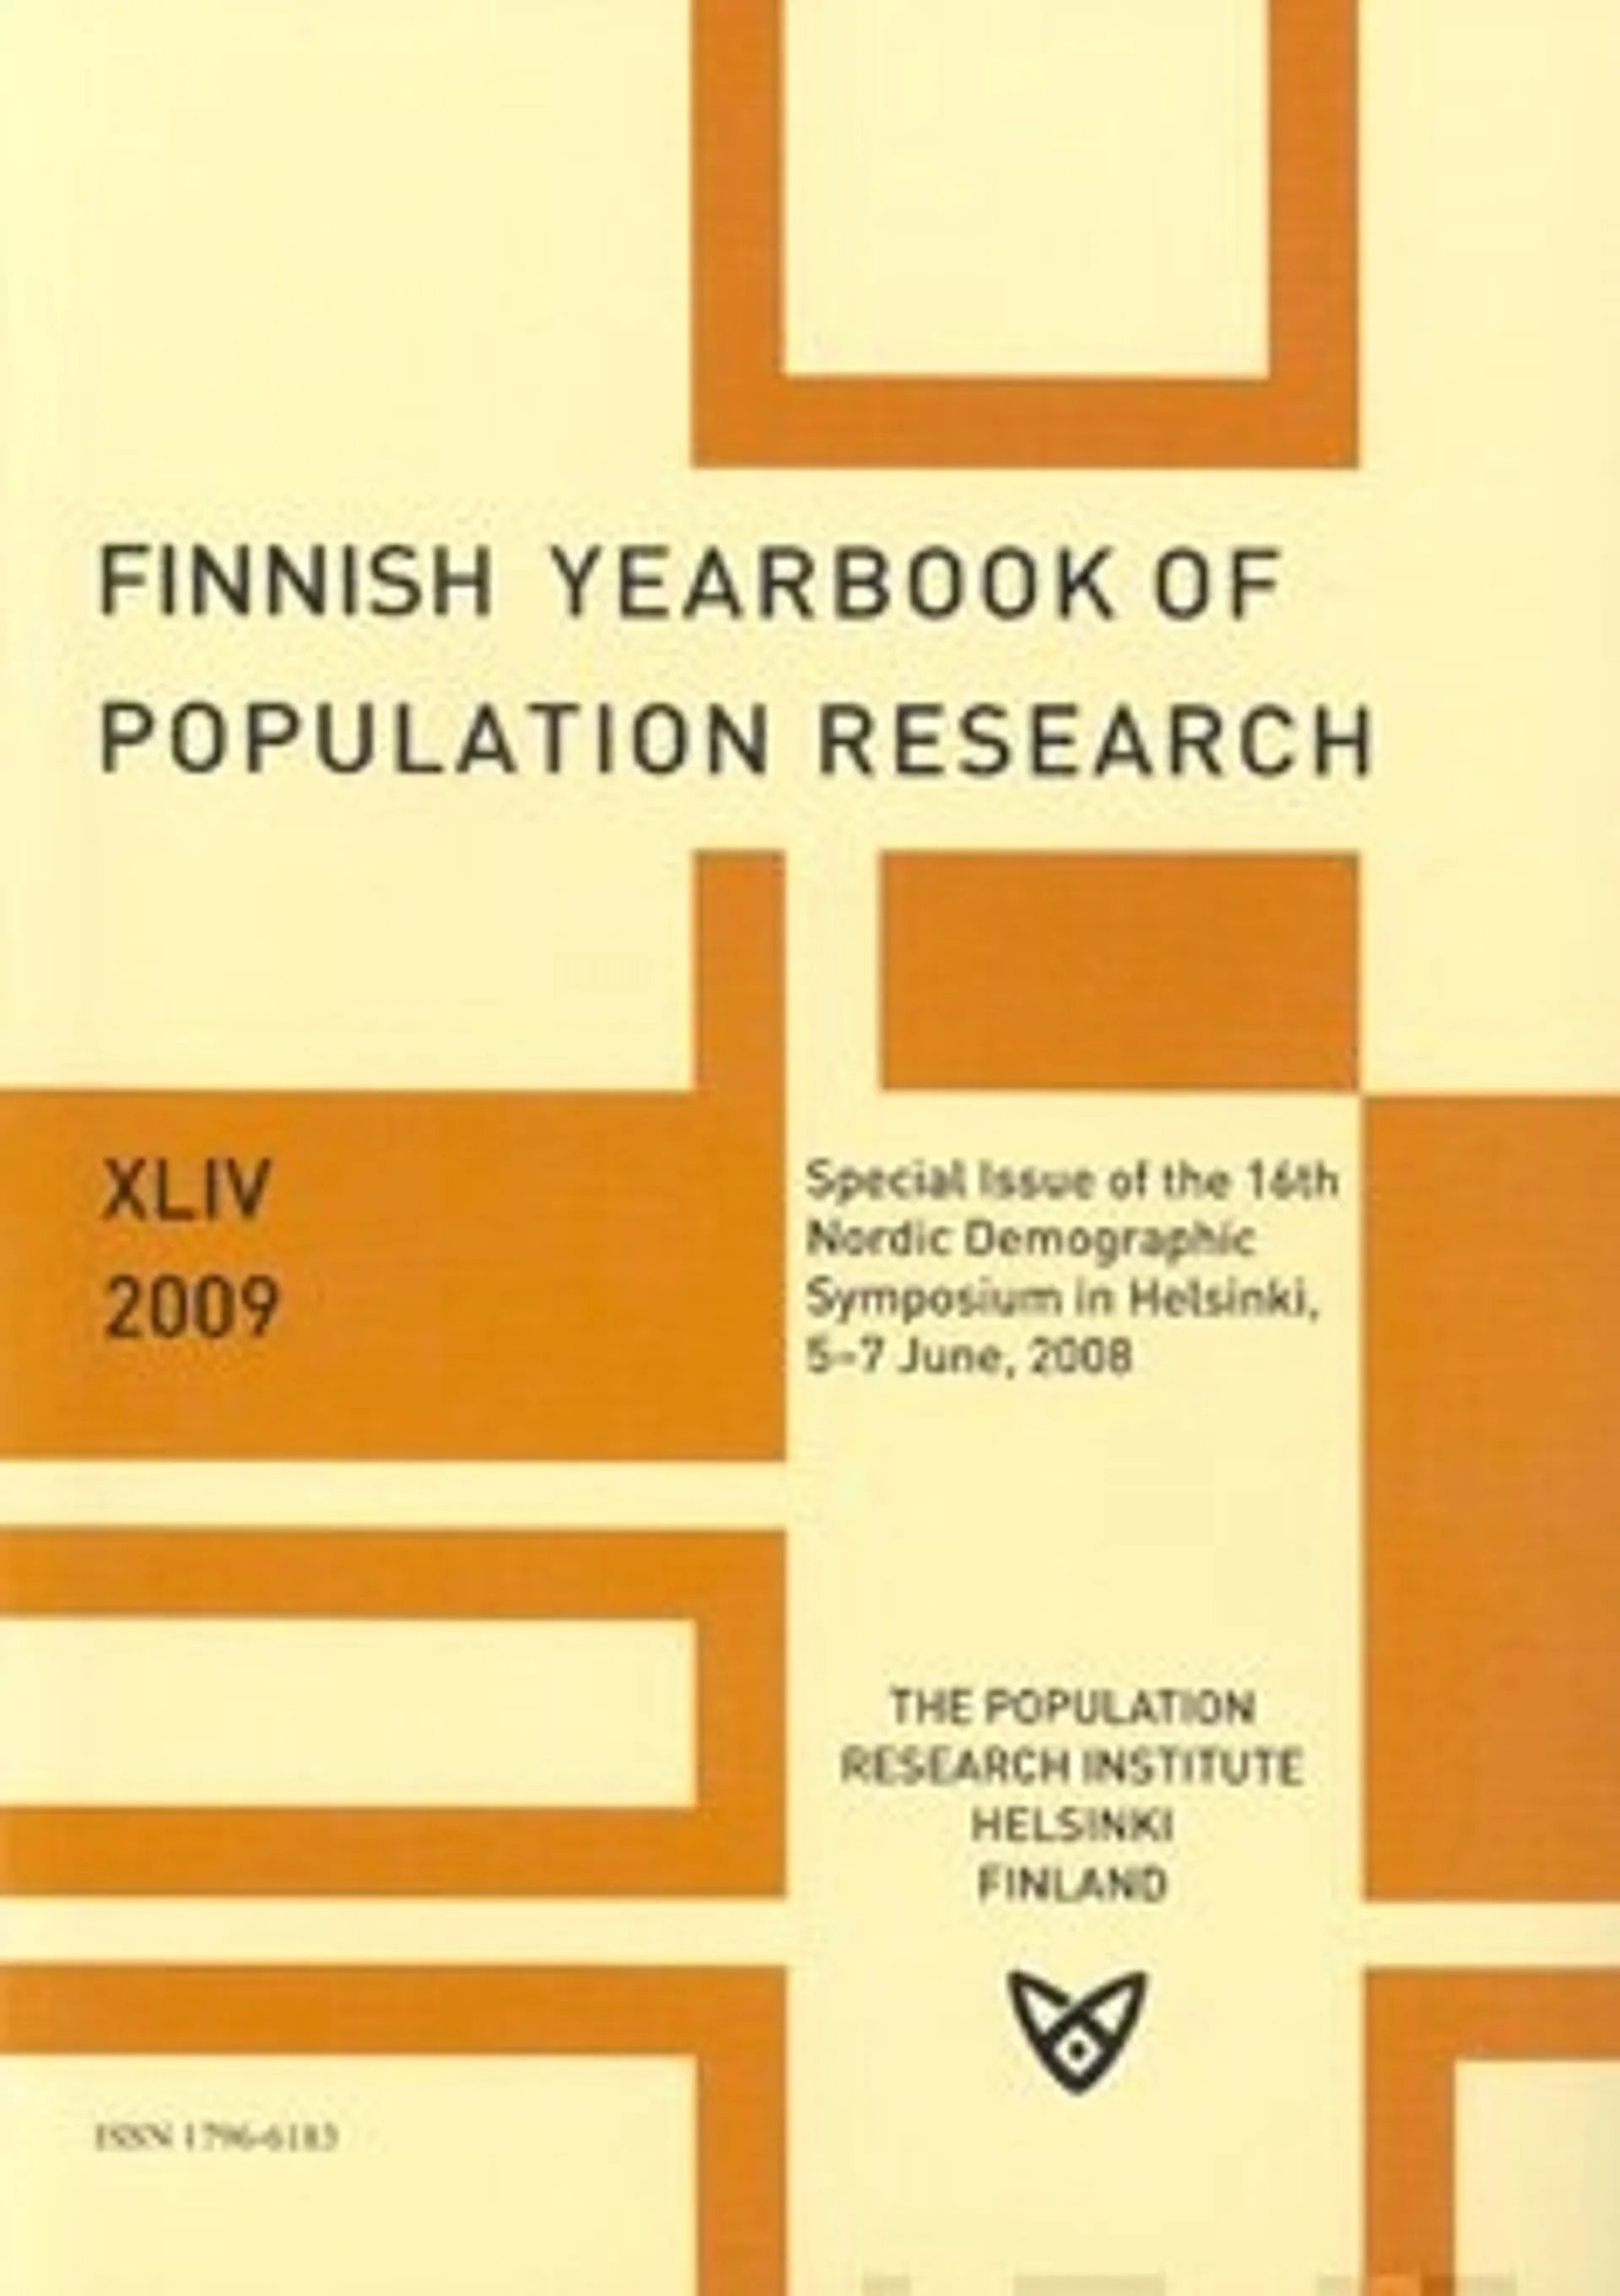 Finnish yearbook of population research XLIV 2009